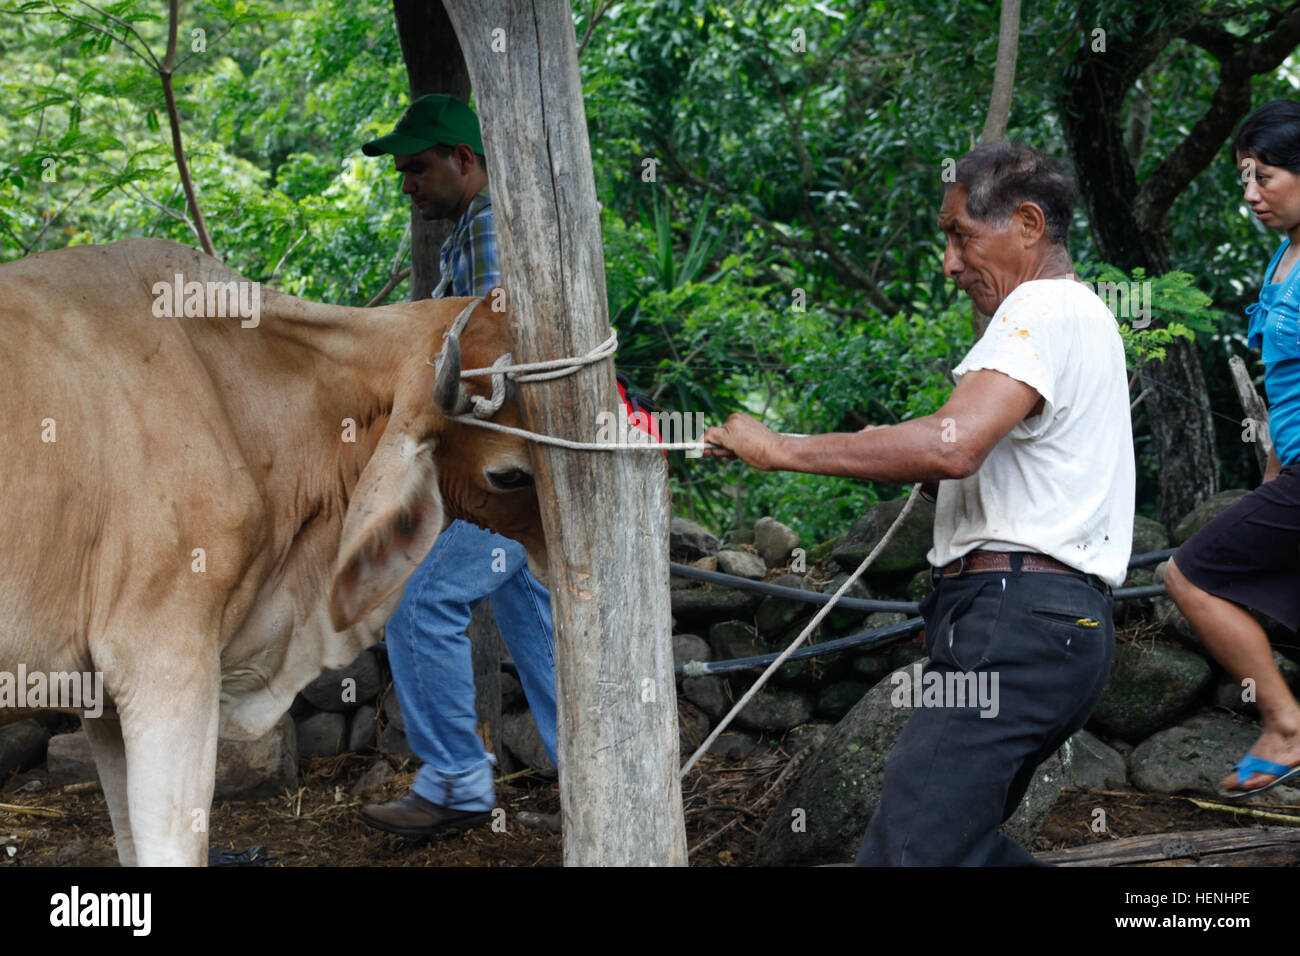 Juan Felipe, a Guatemalan citizen, ties his cow so it can be vaccinated by U.S. and Guatemalan Veterinarians during a Veterinary Readiness Training Exercise during Beyond the Horizon, at Rio Grande, Guatemala, on June 3 2014. Beyond the Horizon is an annual exercise that embraces the partnership between the United States and Guatemala, to provide focused humanitarian assistance through various medical, dental, and civic action programs. (U.S. Army photo by Pfc. Josue Mayorga/released) Beyond The Horizon 2014, Guatemala 140603-A-GK700-089 Stock Photo